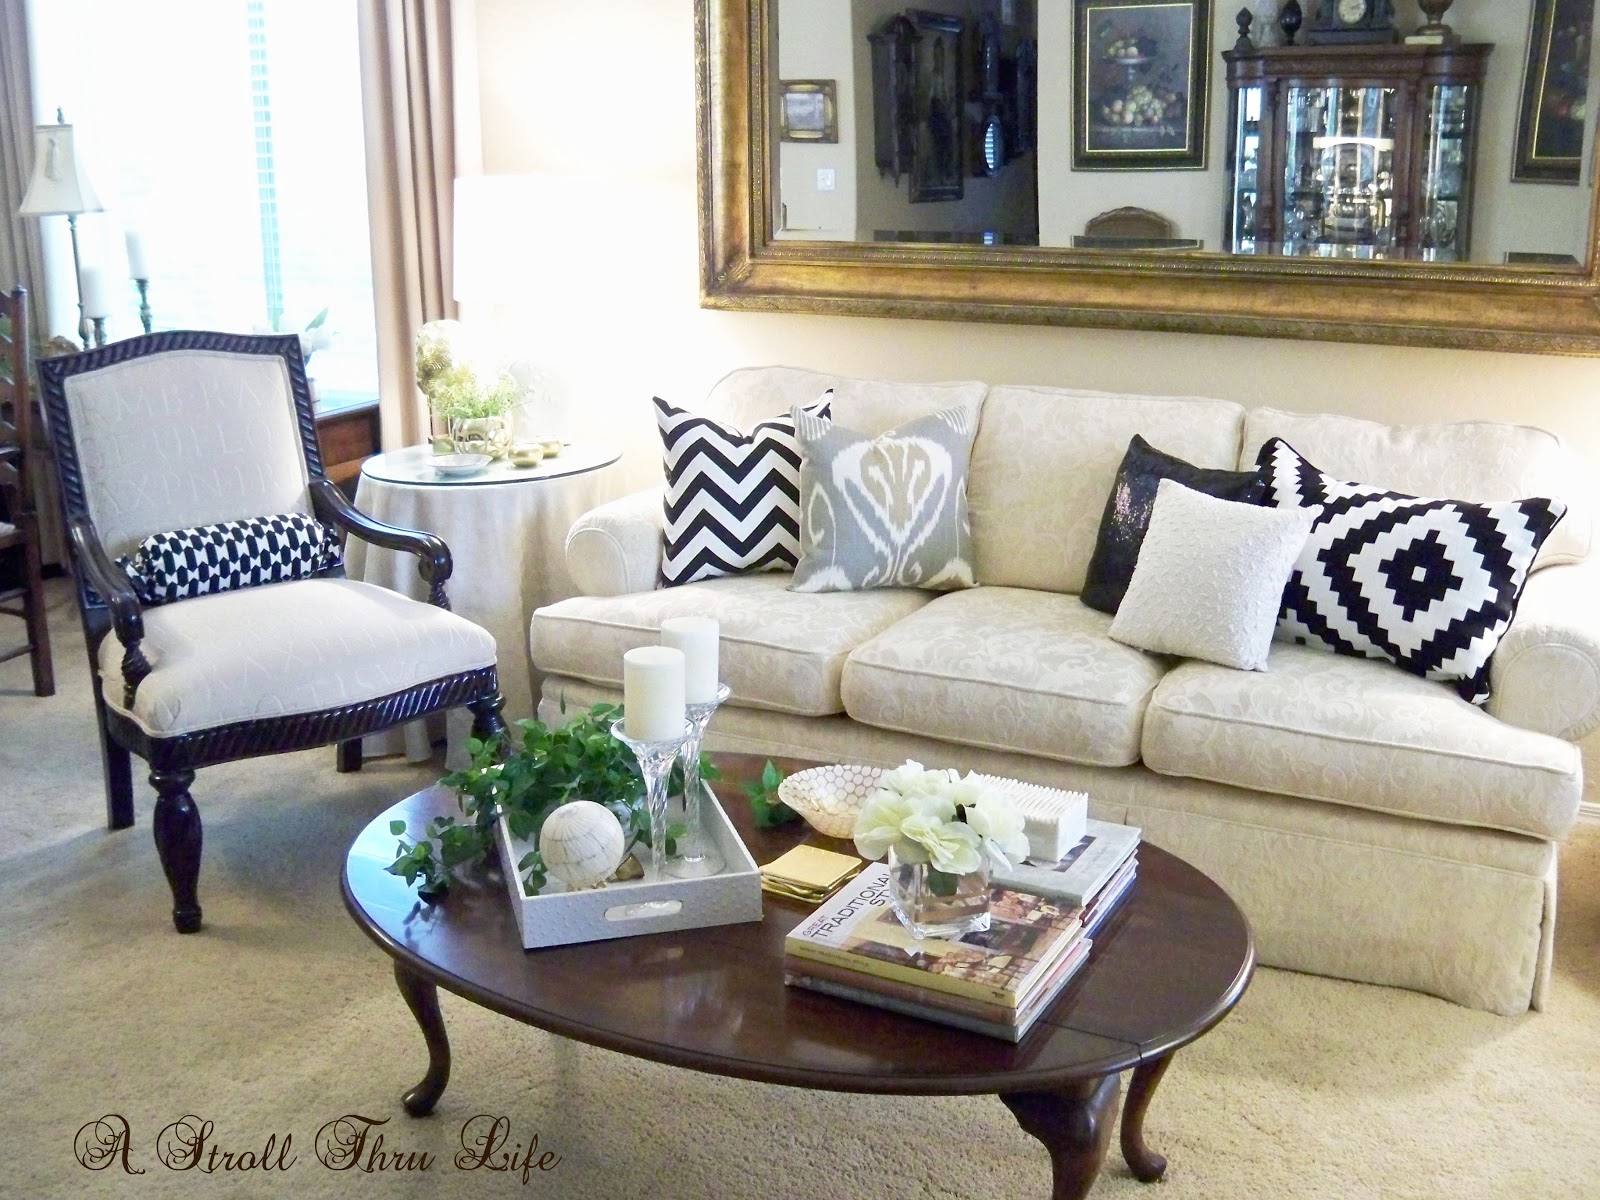 A Stroll Thru Life: How To Revamp A Pillow - Bolster Style